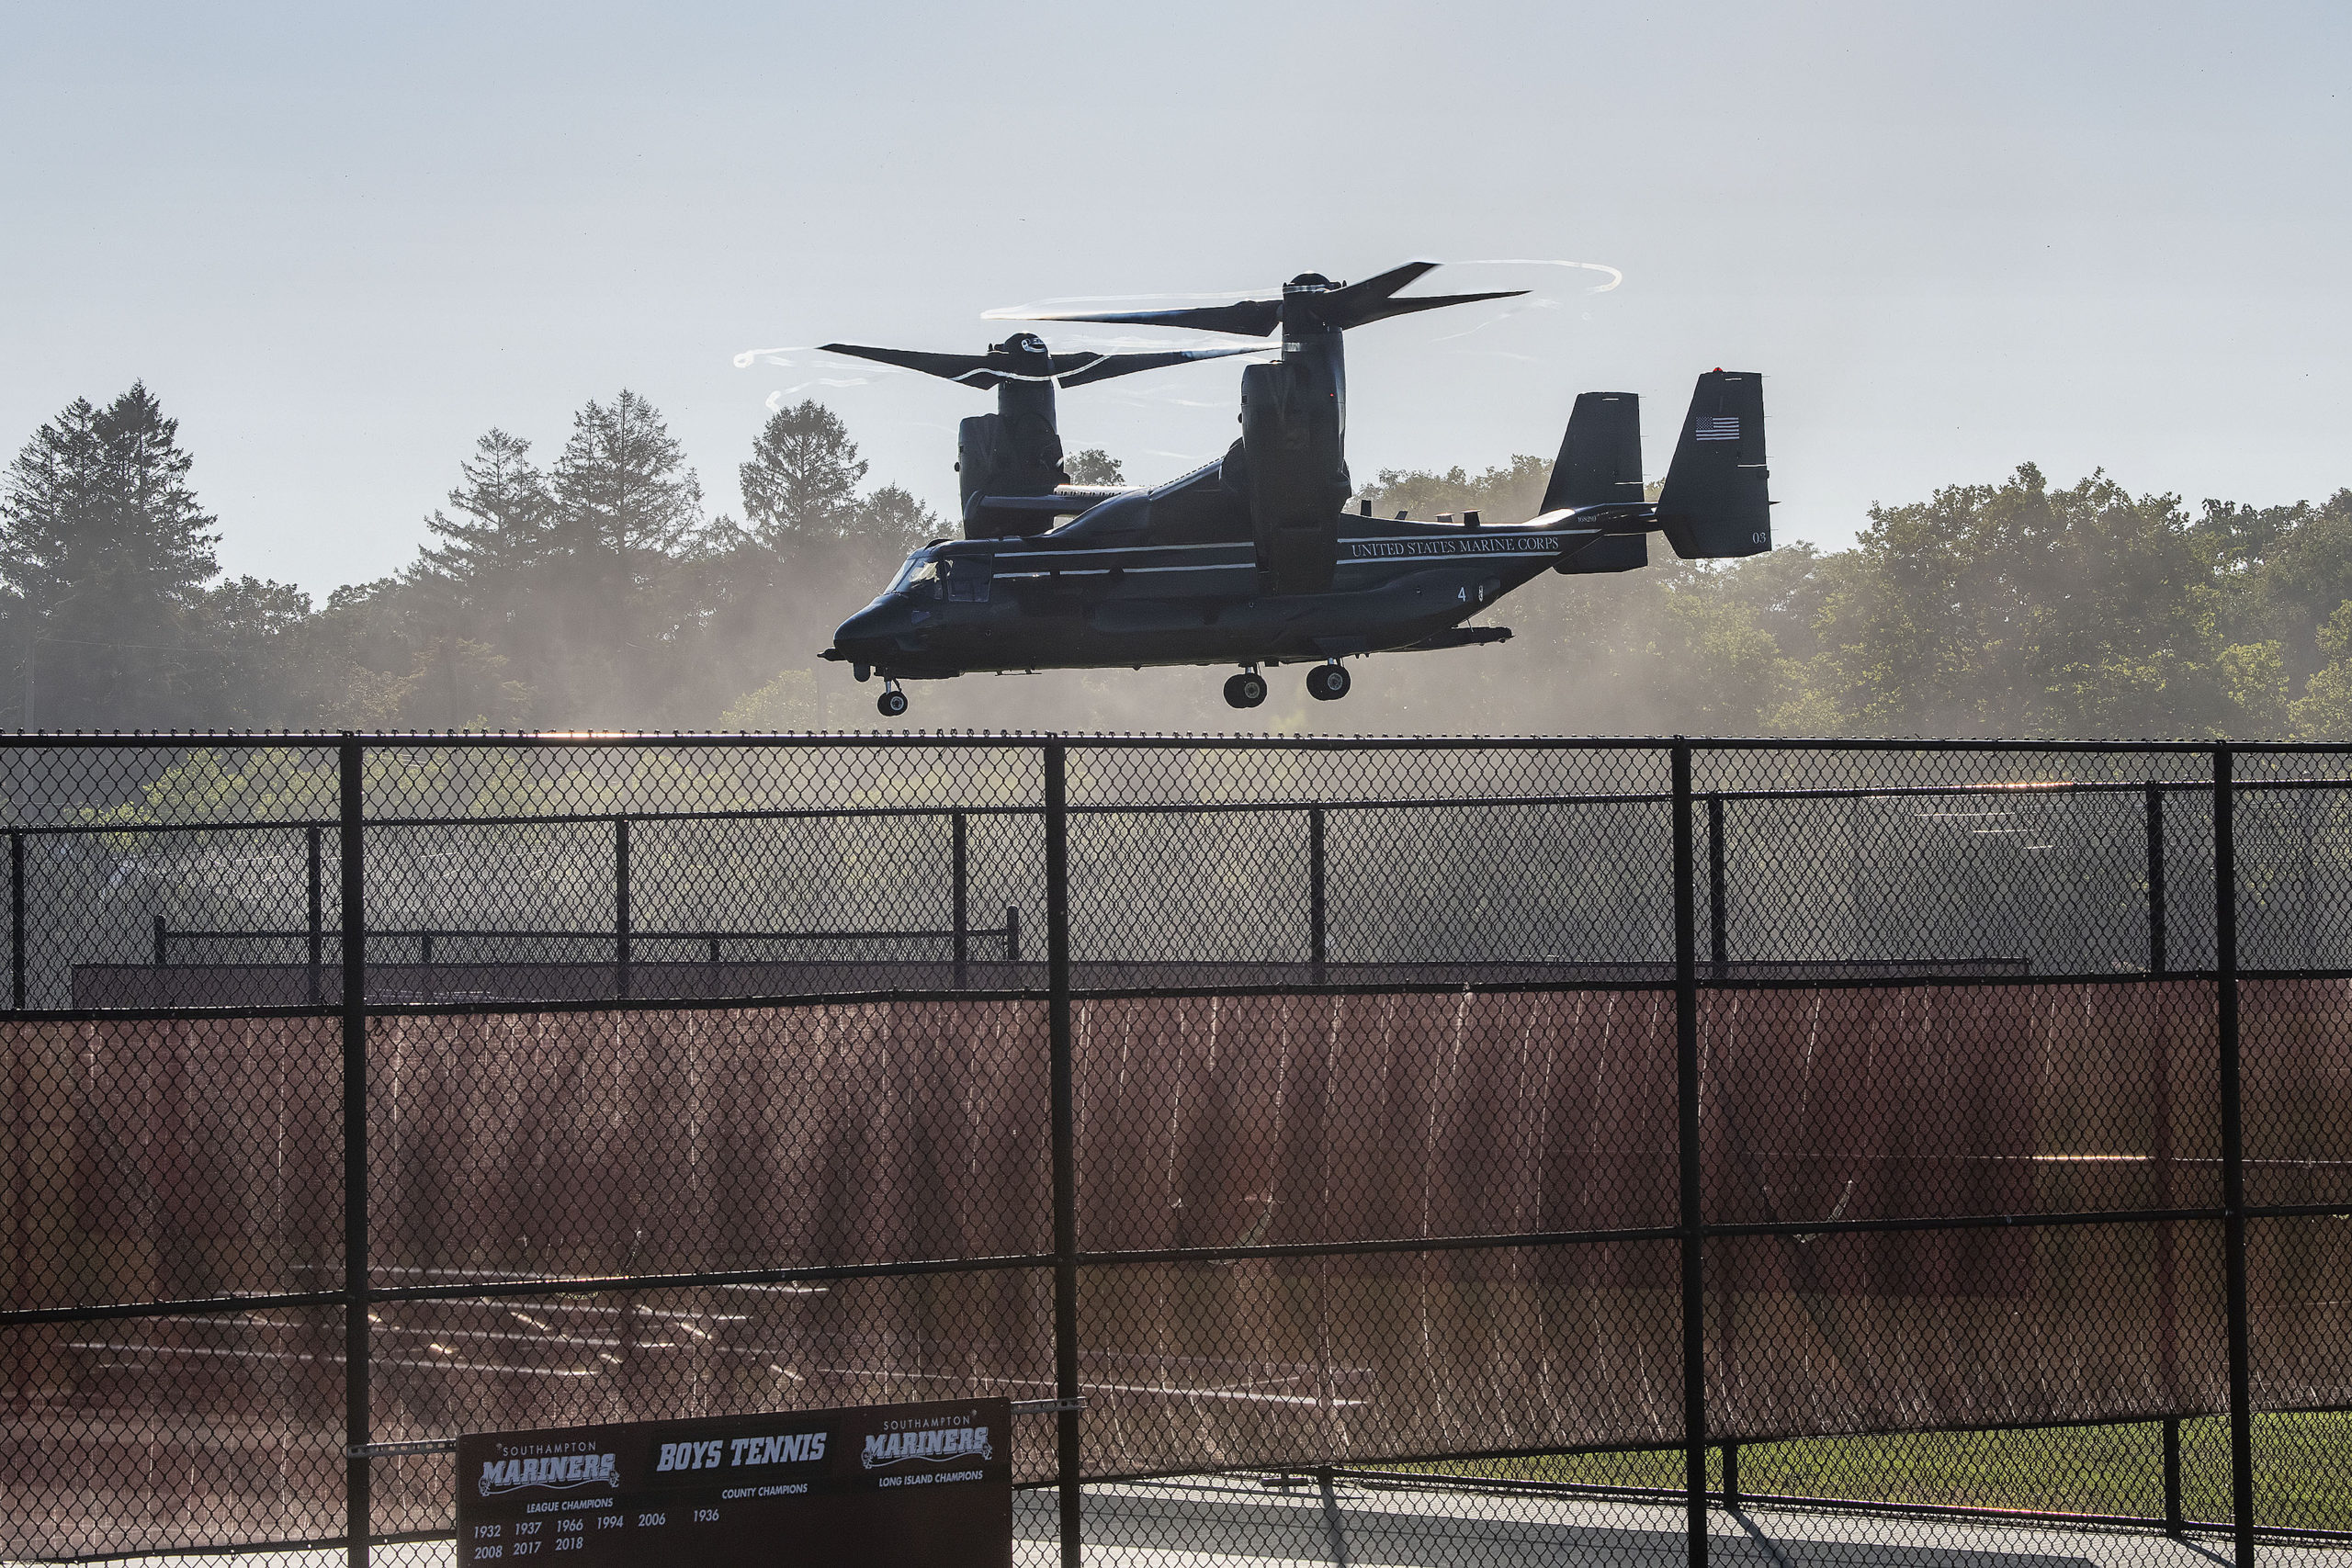 The V-22 Osprey aircraft were the first to arrive at Southampton High School on Saturday. 